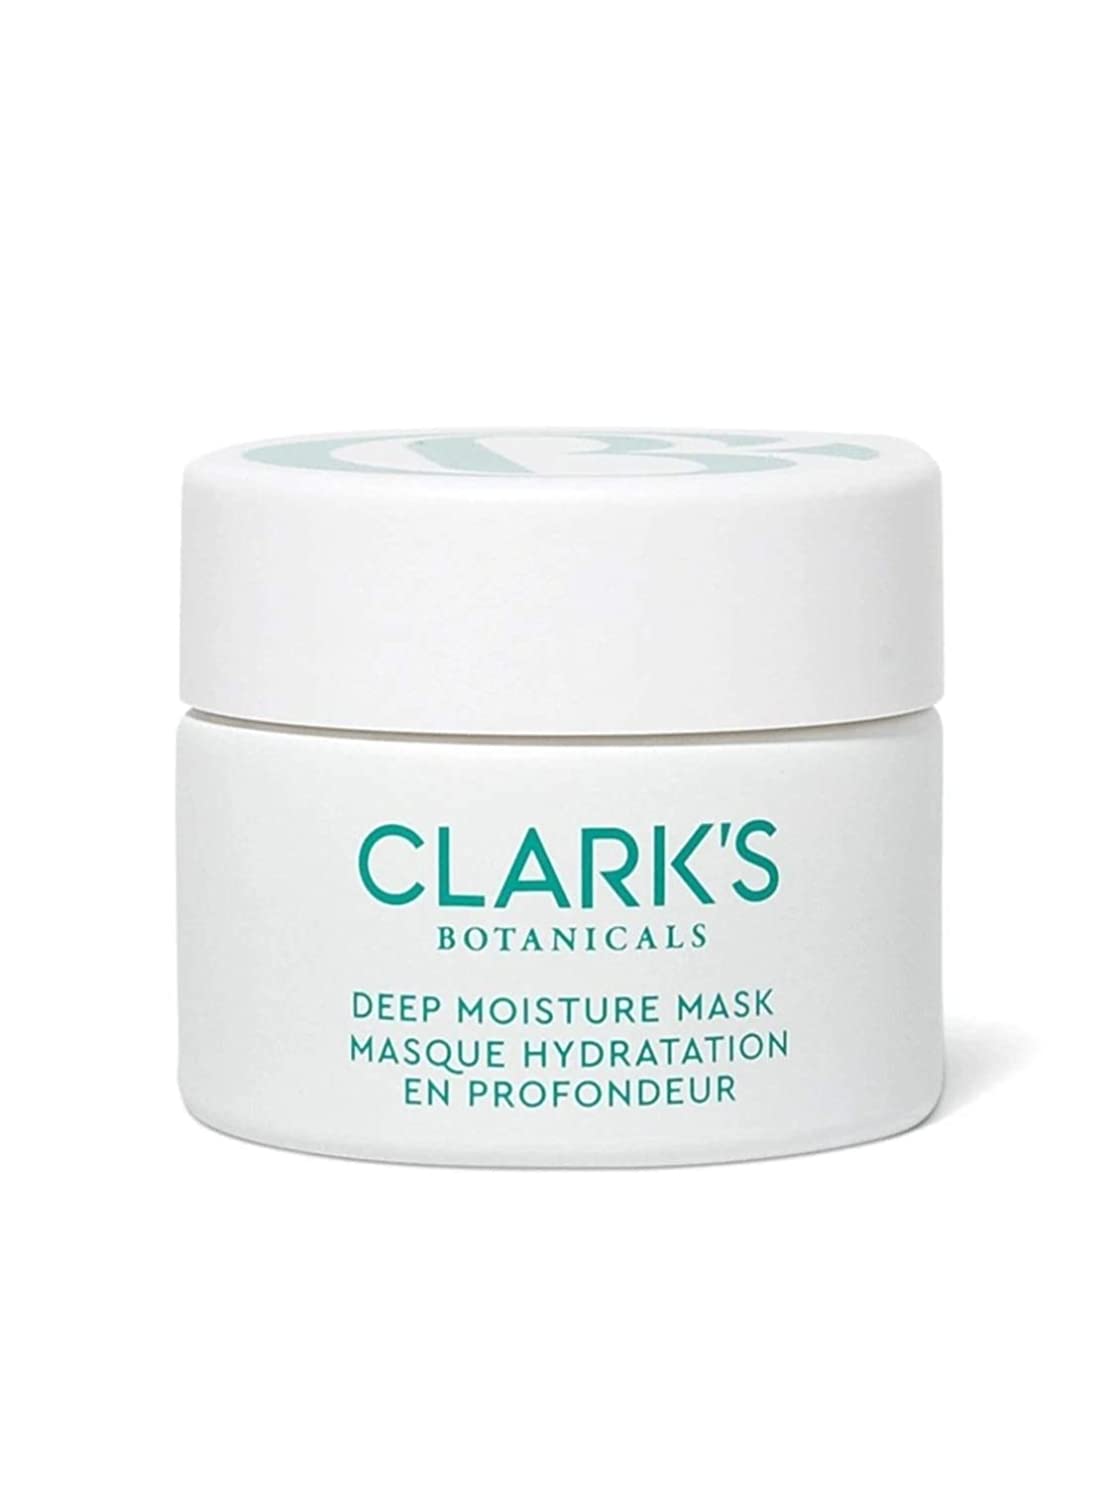 Keep your skin happy and glowing with Clark's Botanicals revitalizing products for your moisturizing, hydrating, and cleansing needs.